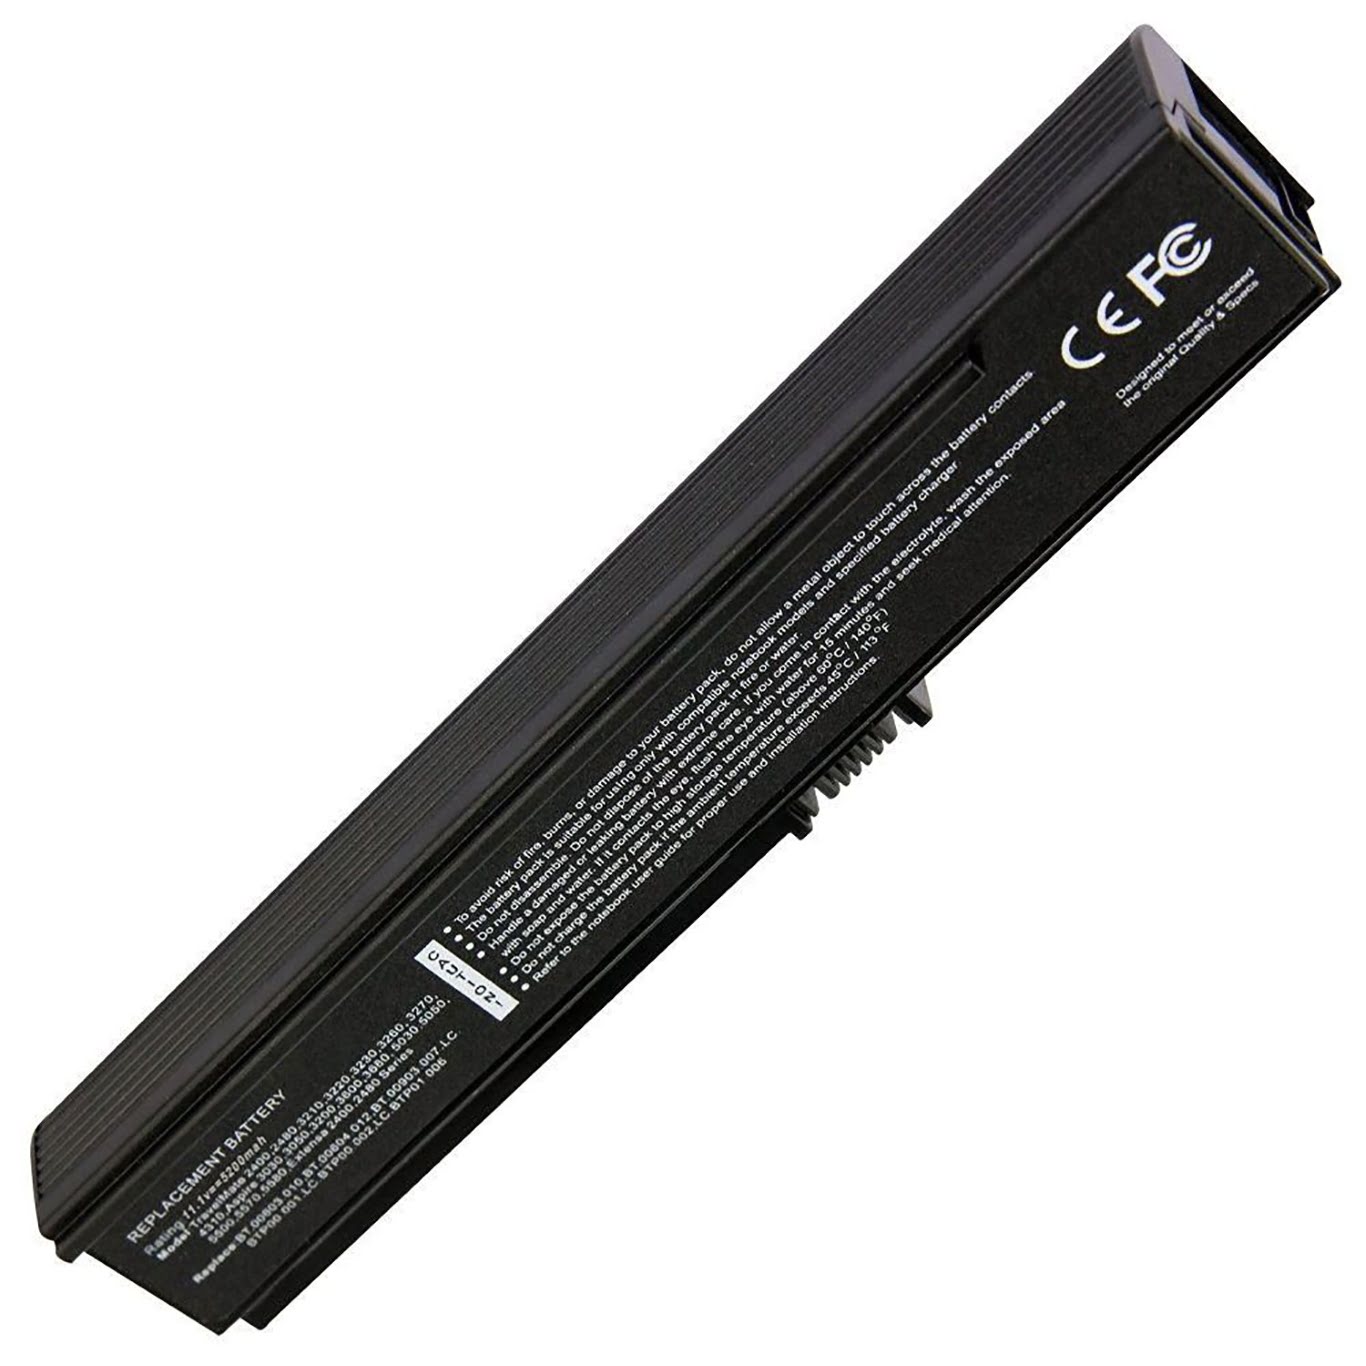 3UR18650F-3-QC-ZR1, 3UR18650Y-2-QC261 replacement Laptop Battery for Acer Aspire 3030, Aspire 3050, 6 cells, 11.1V, 4400mAh